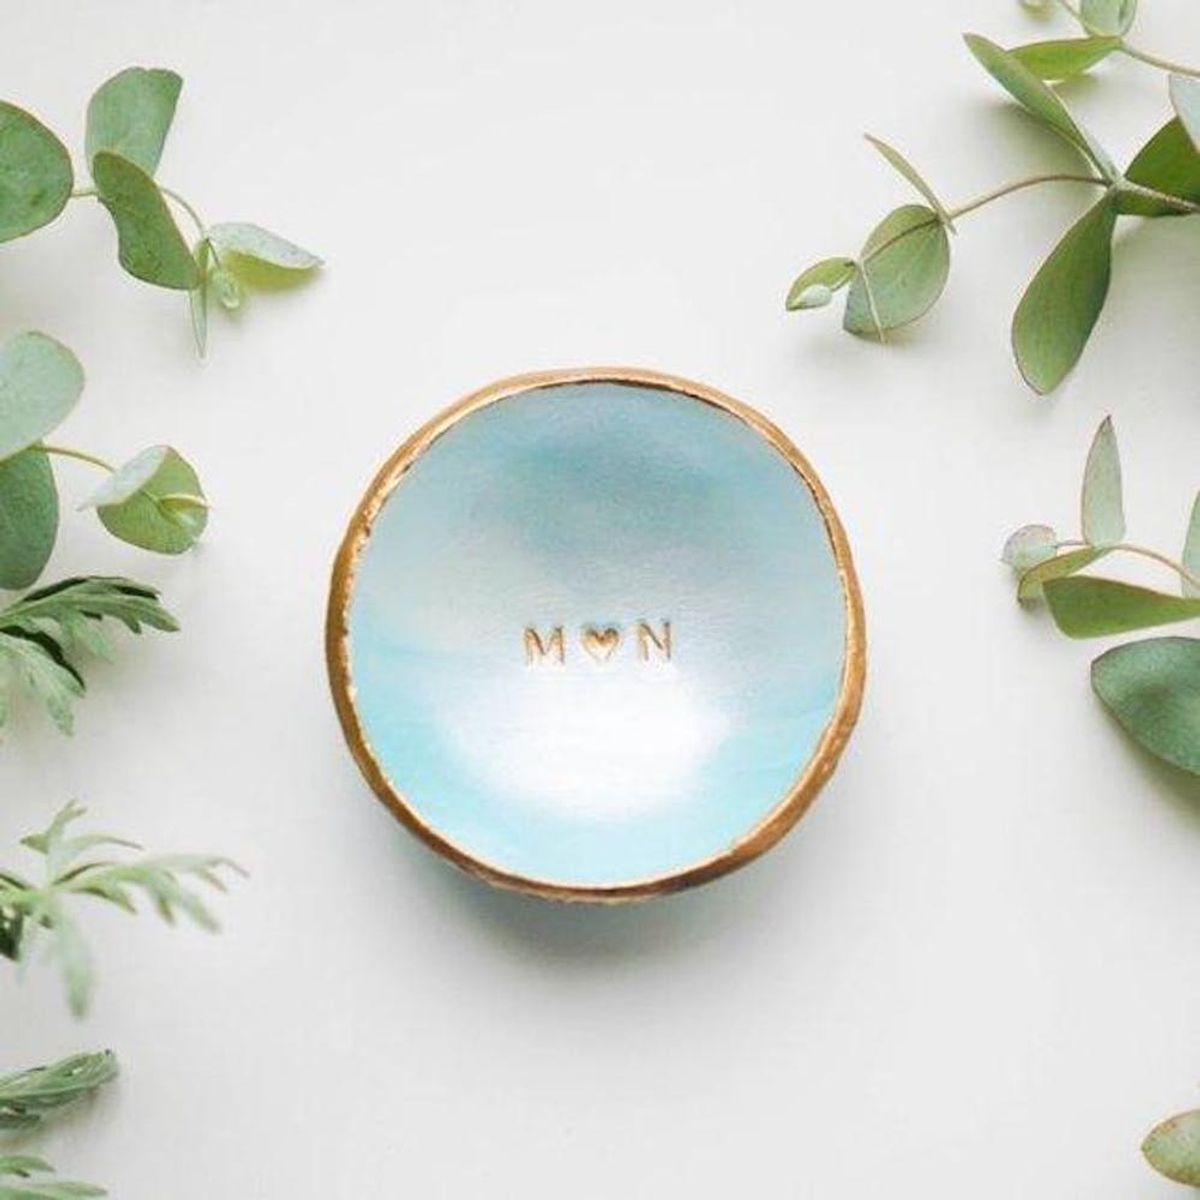 15 Personalized Etsy Gifts That Show How Much You Really Care